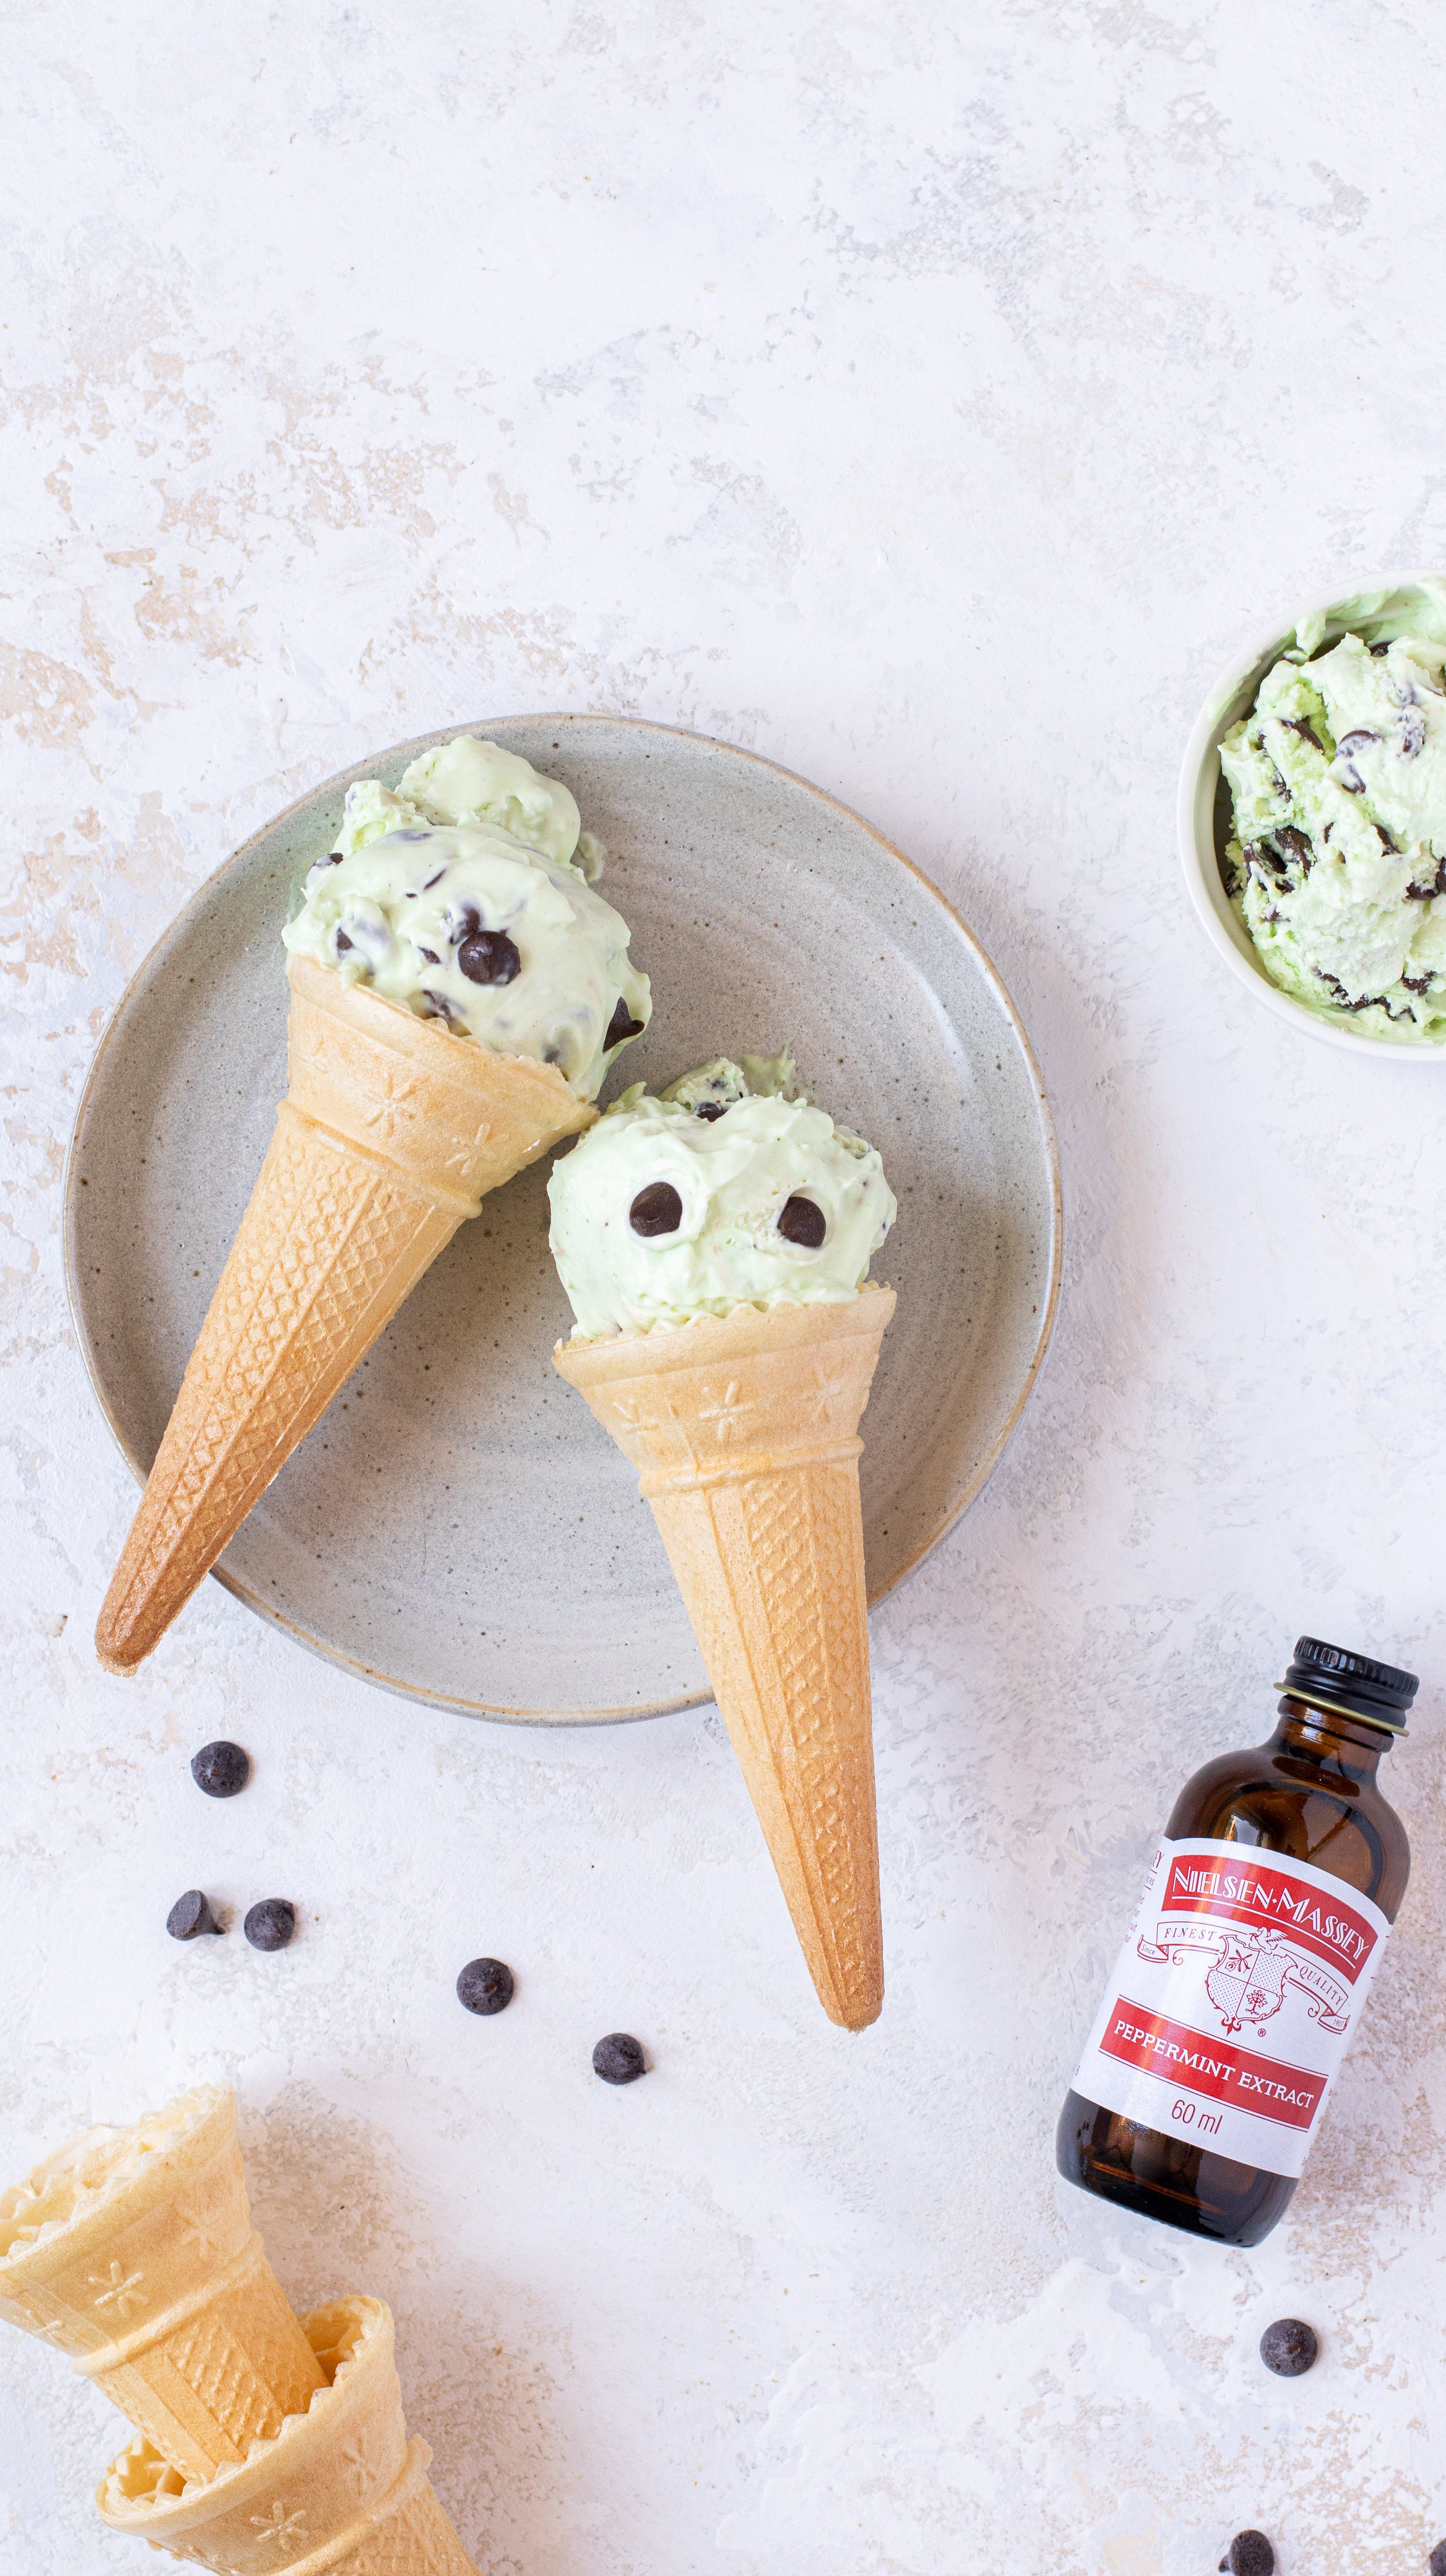 Mint chocolate chip ice cream in a cone on a plate with cones and peppermint extract